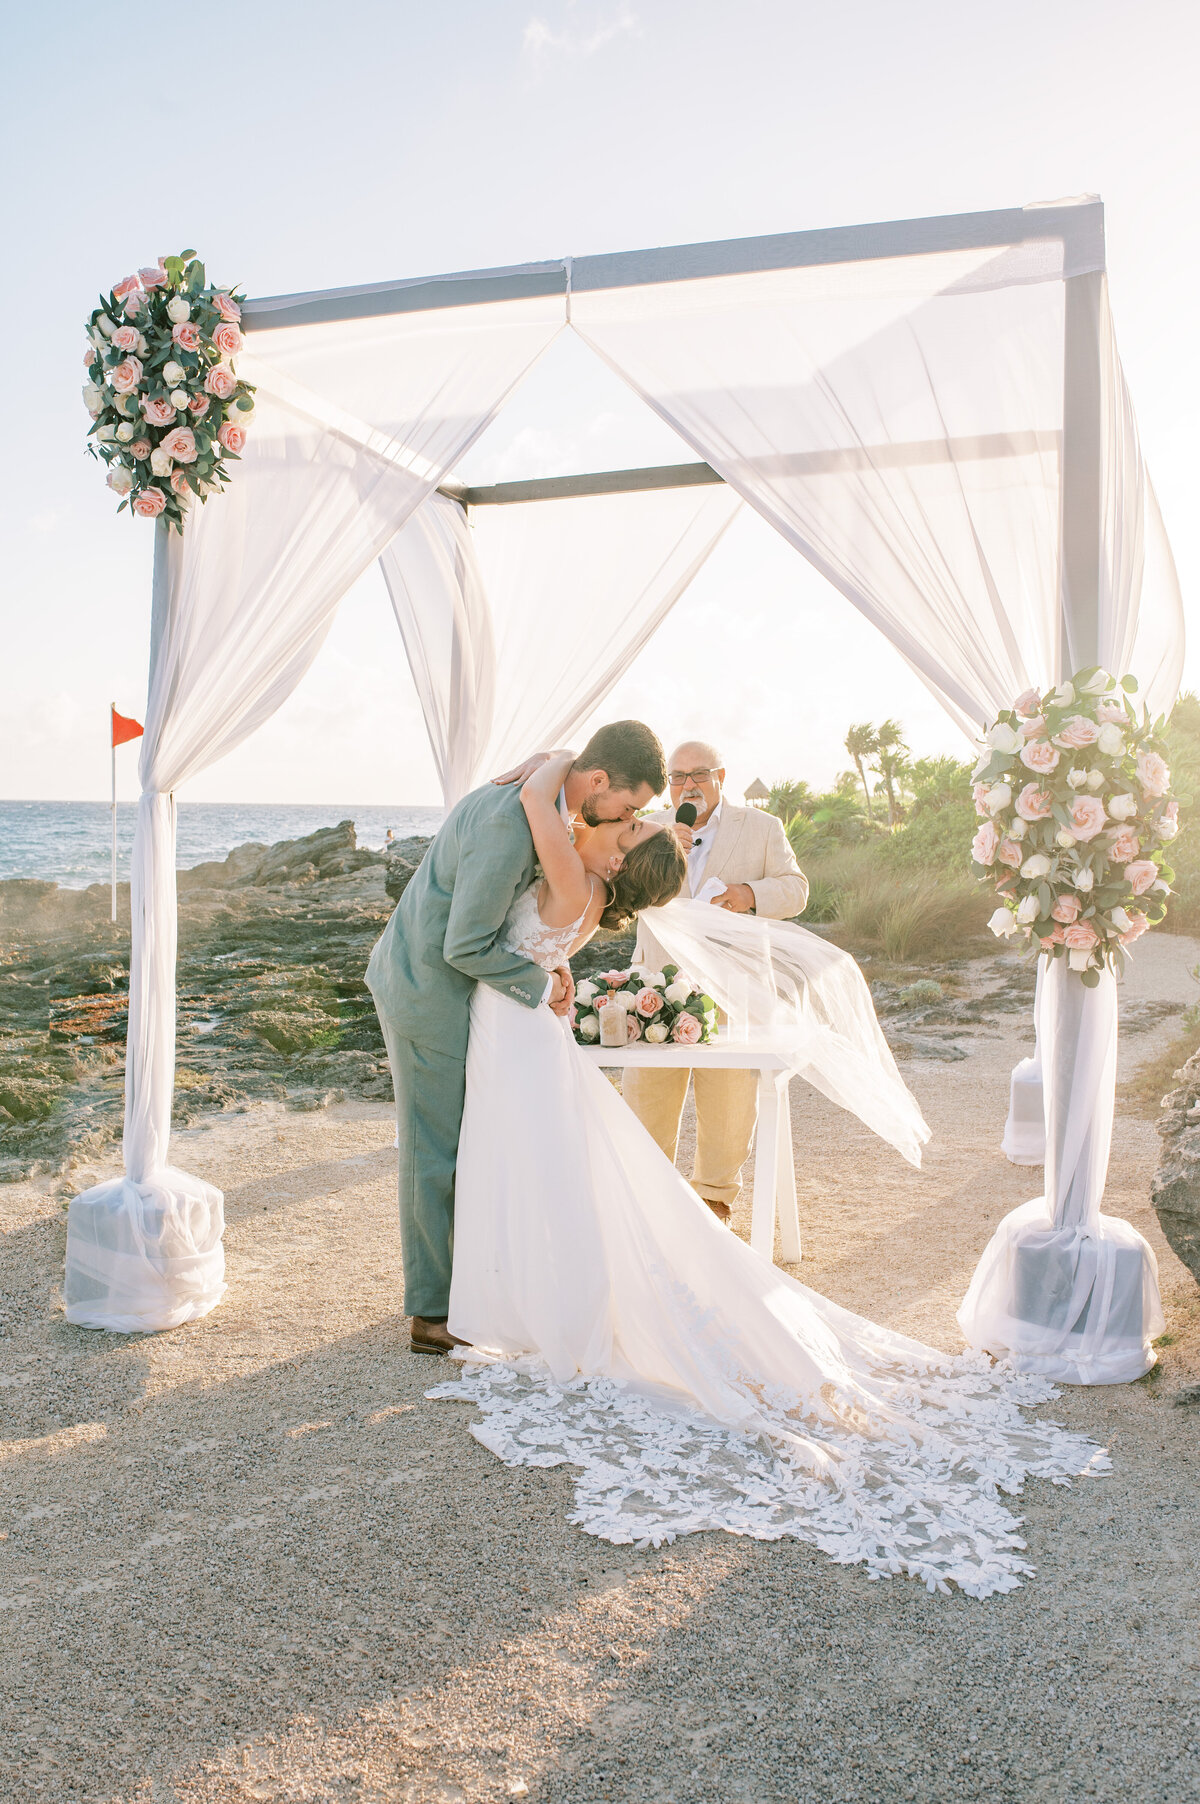 Ceremony on the beach in Mexico